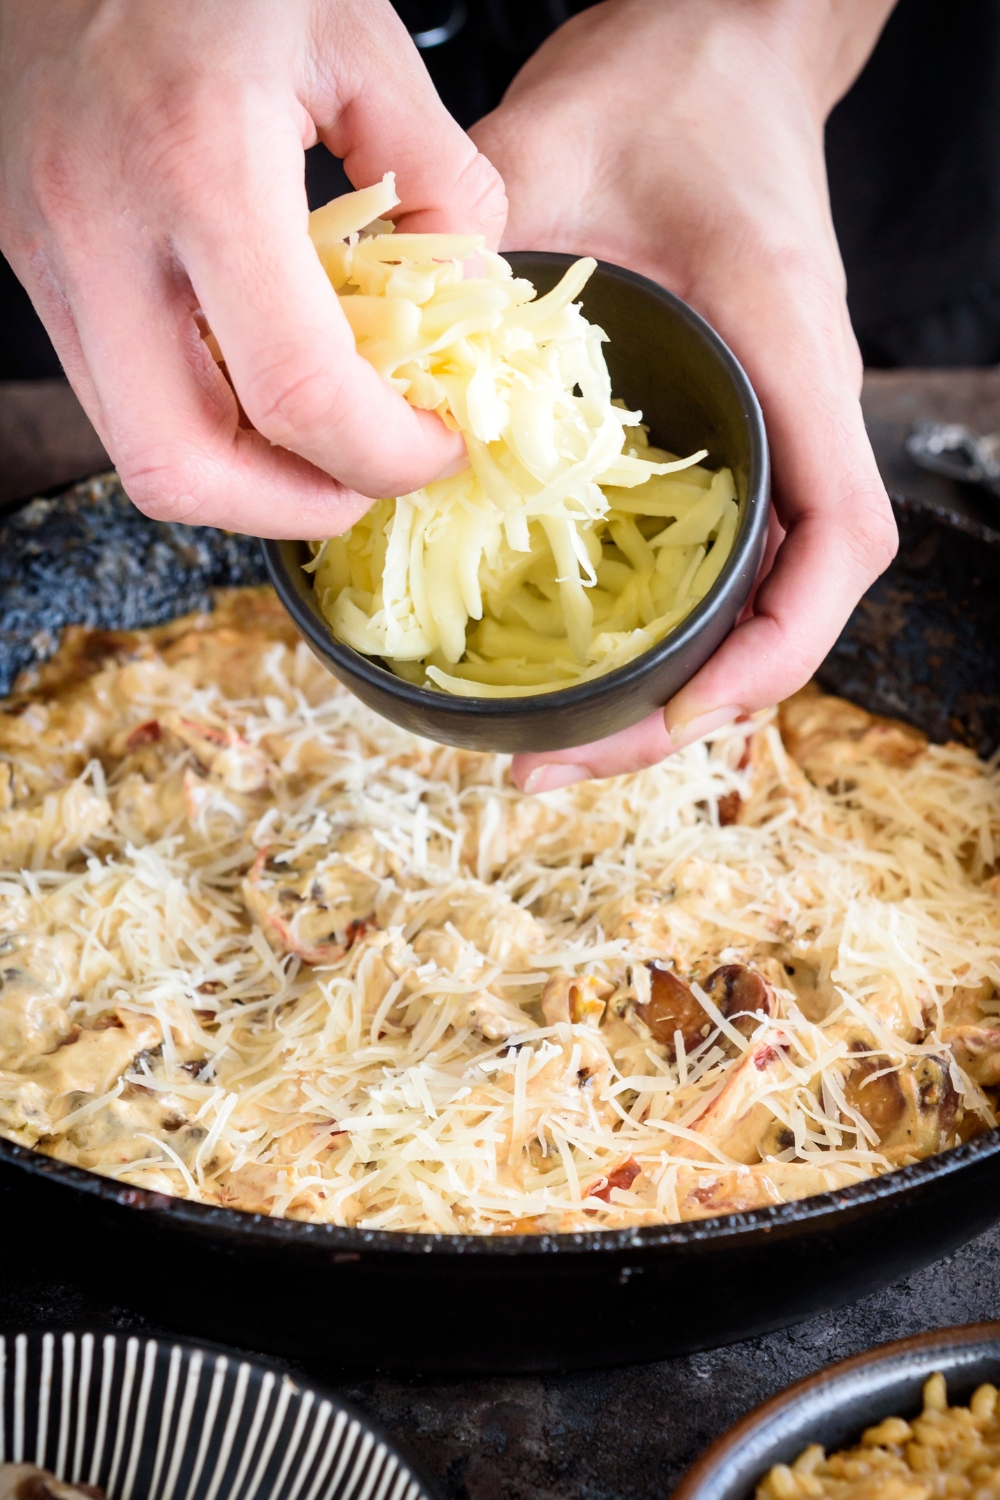 A person holding a bowl of cheese and sprinkling it over a skillet filled with chicken, peppers, and mushrooms in a cream sauce.